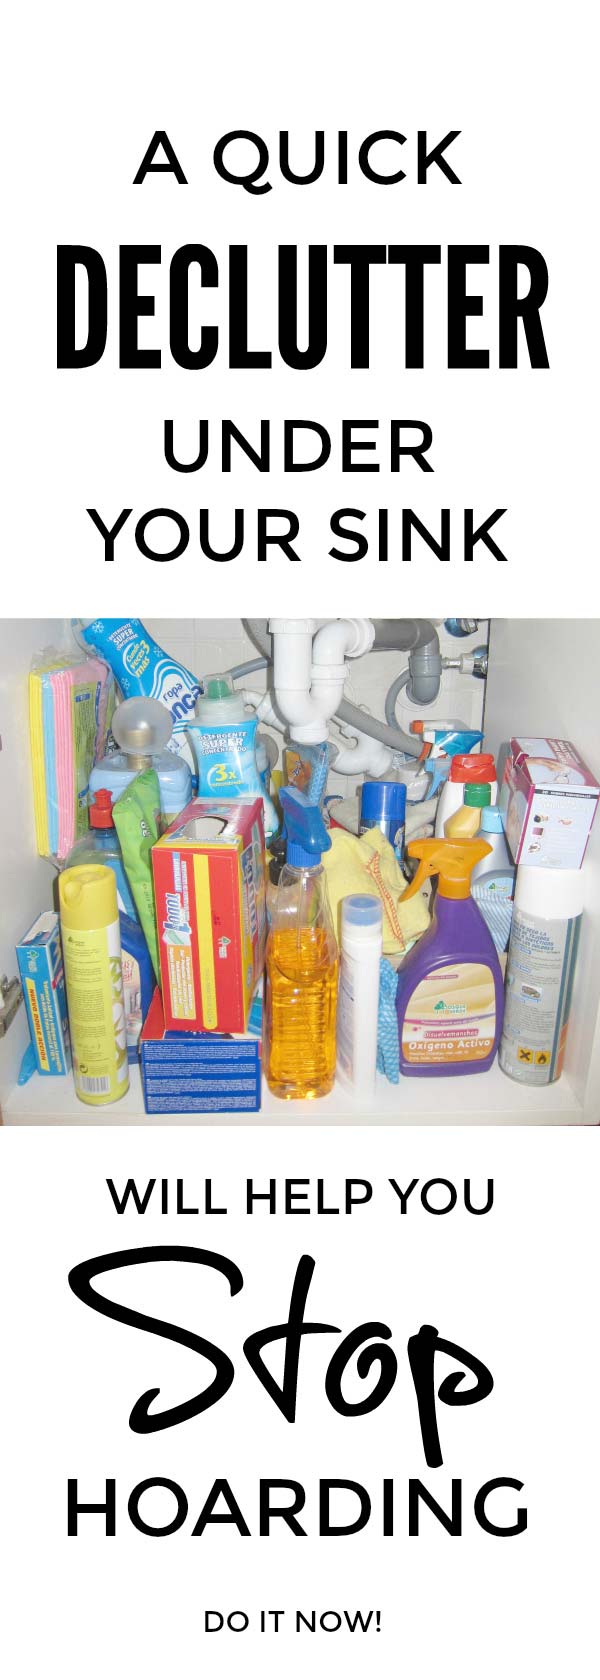 You need to declutter under your kitchen sink because it will actually help you stop hoarding and tackle your shopping addiction #declutter #organization #clutterfree #happierwithout